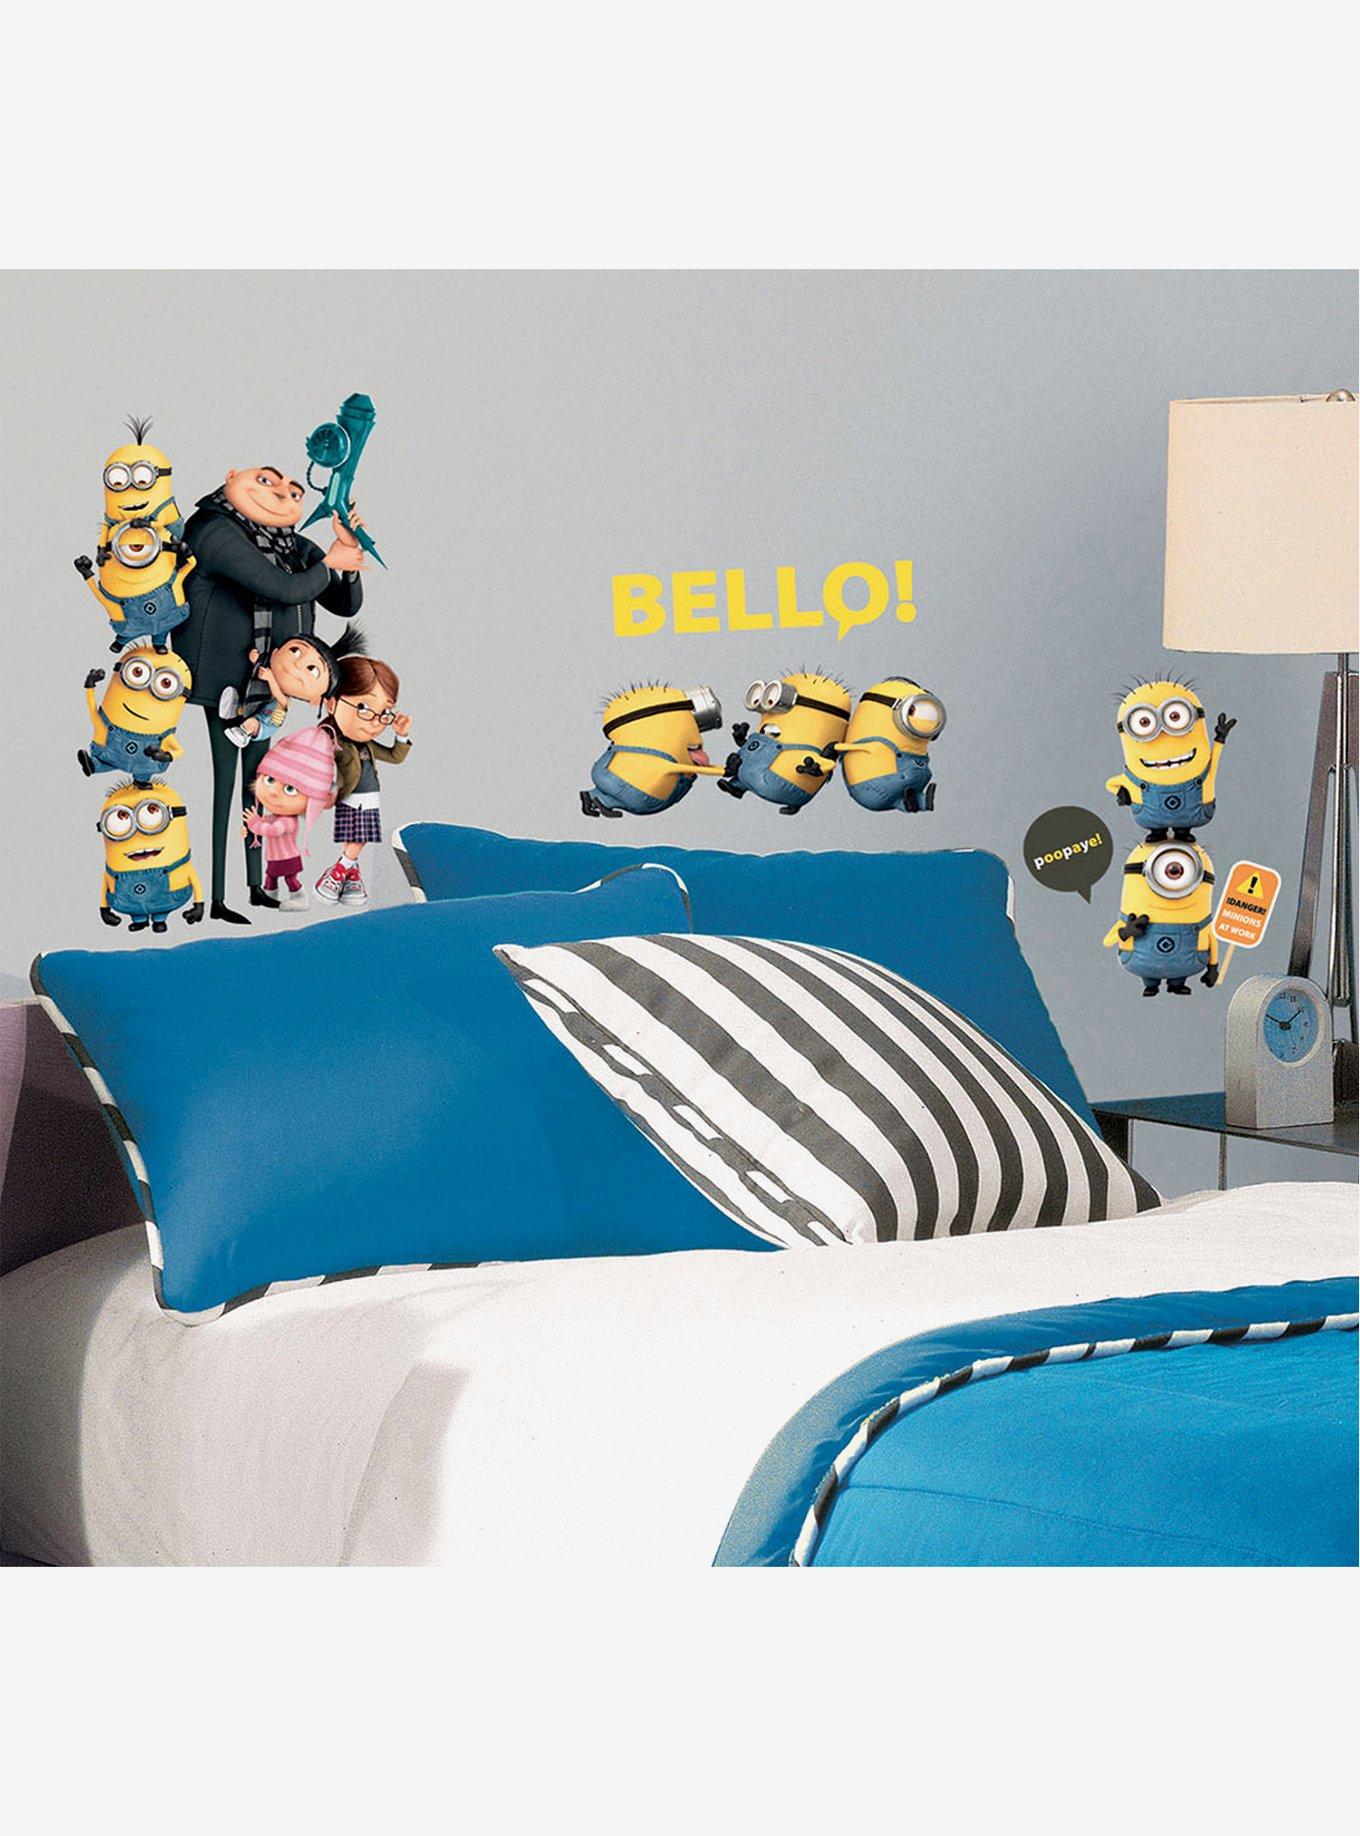 Minions Despicable Me 2 Peel And Stick Wall Decals